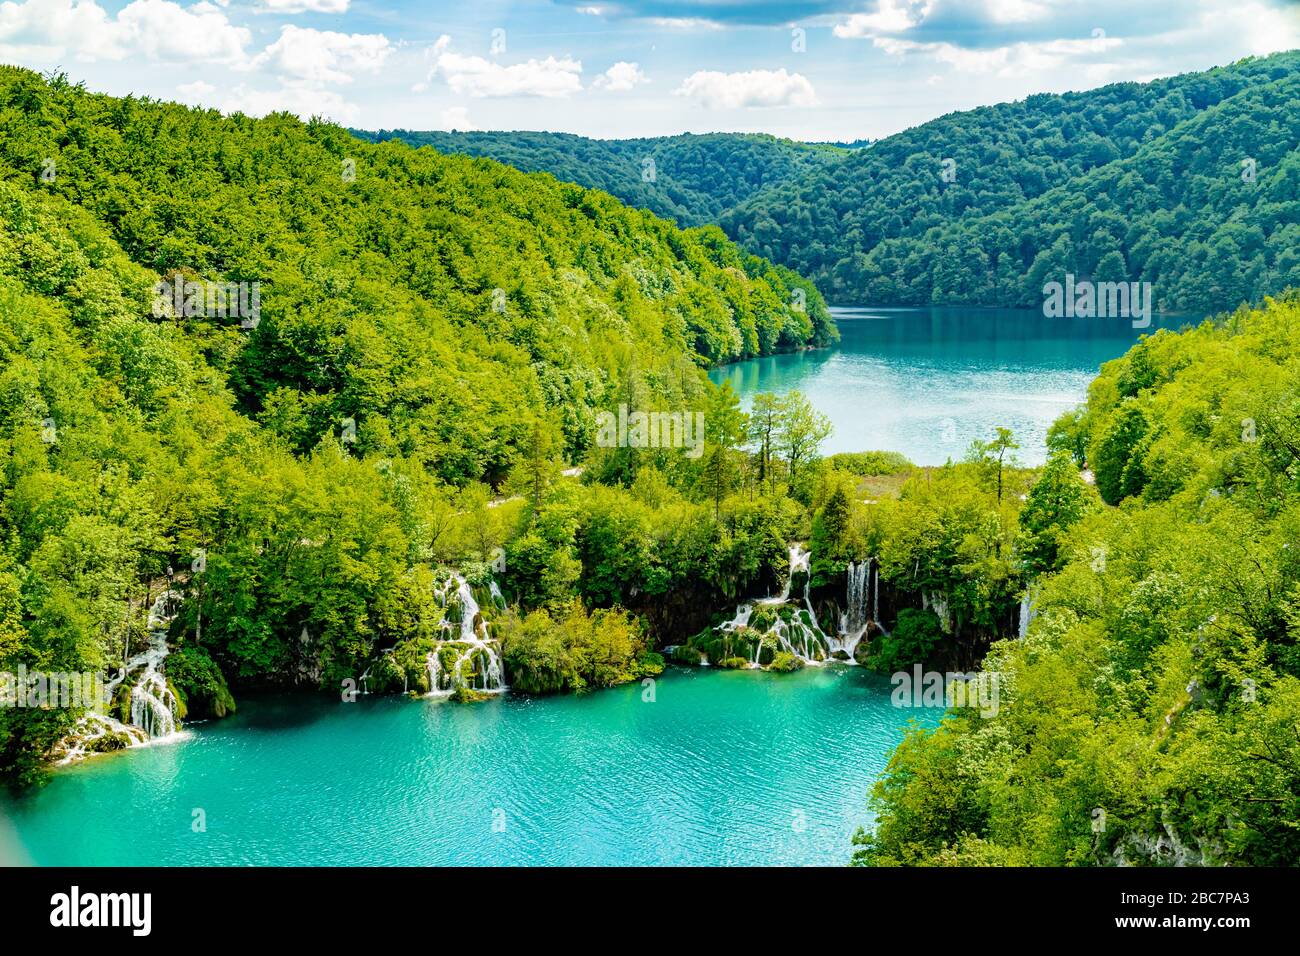 Waterfalls flowing between lakes and surrounded by wooded hills, Plitvice Lakes National Park, Croatia, Europe. May 2017. Stock Photo